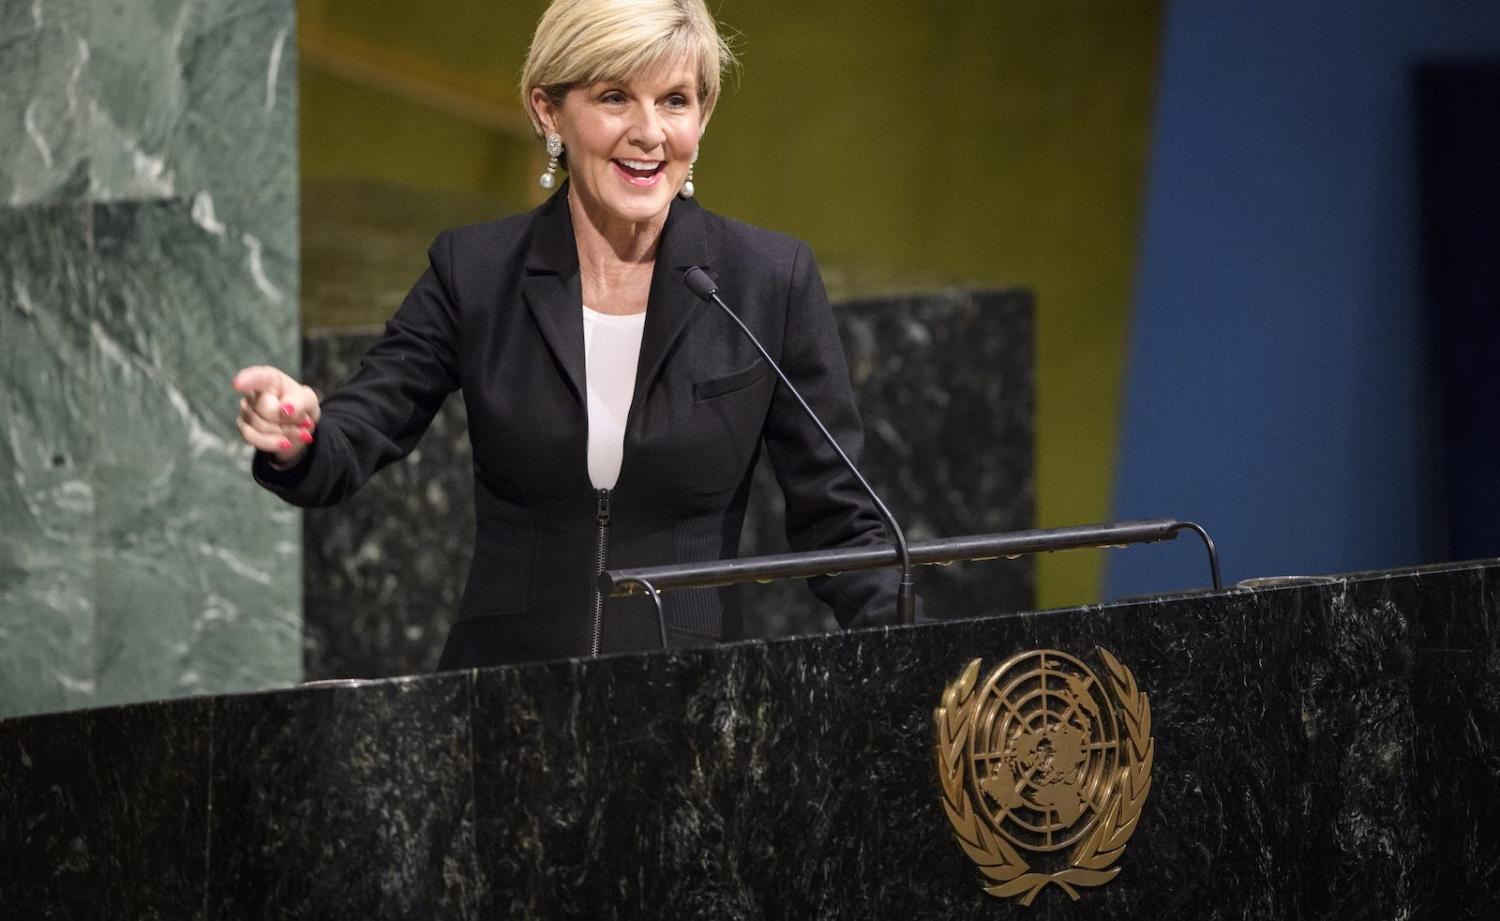 Julie Bishop, as Foreign Minister, speaking at UN headquarters in New York on International Women’s Day 2018 (Photo: Manuel Elias/UN)